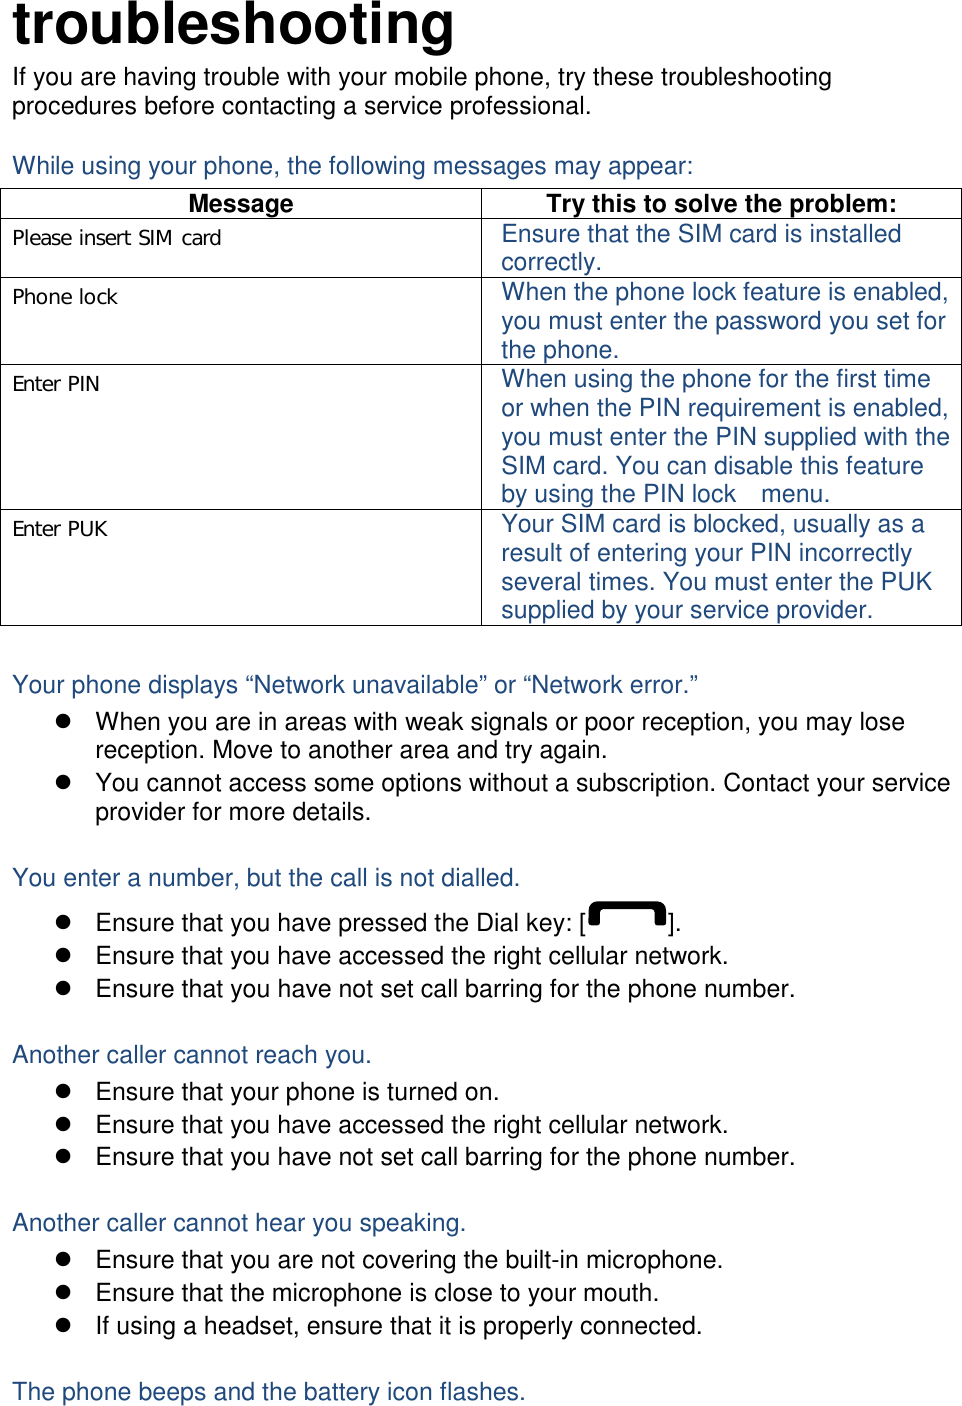 troubleshooting If you are having trouble with your mobile phone, try these troubleshooting procedures before contacting a service professional. While using your phone, the following messages may appear: Message  Try this to solve the problem:Please insert SIM card  Ensure that the SIM card is installed correctly. Phone lock  When the phone lock feature is enabled, you must enter the password you set for the phone. Enter PIN  When using the phone for the first time or when the PIN requirement is enabled, you must enter the PIN supplied with the SIM card. You can disable this feature by using the PIN lock    menu. Enter PUK  Your SIM card is blocked, usually as a result of entering your PIN incorrectly several times. You must enter the PUK supplied by your service provider.    Your phone displays “Network unavailable” or “Network error.” z  When you are in areas with weak signals or poor reception, you may lose reception. Move to another area and try again. z  You cannot access some options without a subscription. Contact your service provider for more details.  You enter a number, but the call is not dialled. z  Ensure that you have pressed the Dial key: [ ]. z  Ensure that you have accessed the right cellular network. z  Ensure that you have not set call barring for the phone number.  Another caller cannot reach you. z  Ensure that your phone is turned on. z  Ensure that you have accessed the right cellular network. z  Ensure that you have not set call barring for the phone number.  Another caller cannot hear you speaking. z  Ensure that you are not covering the built-in microphone. z  Ensure that the microphone is close to your mouth. z  If using a headset, ensure that it is properly connected.  The phone beeps and the battery icon flashes. 